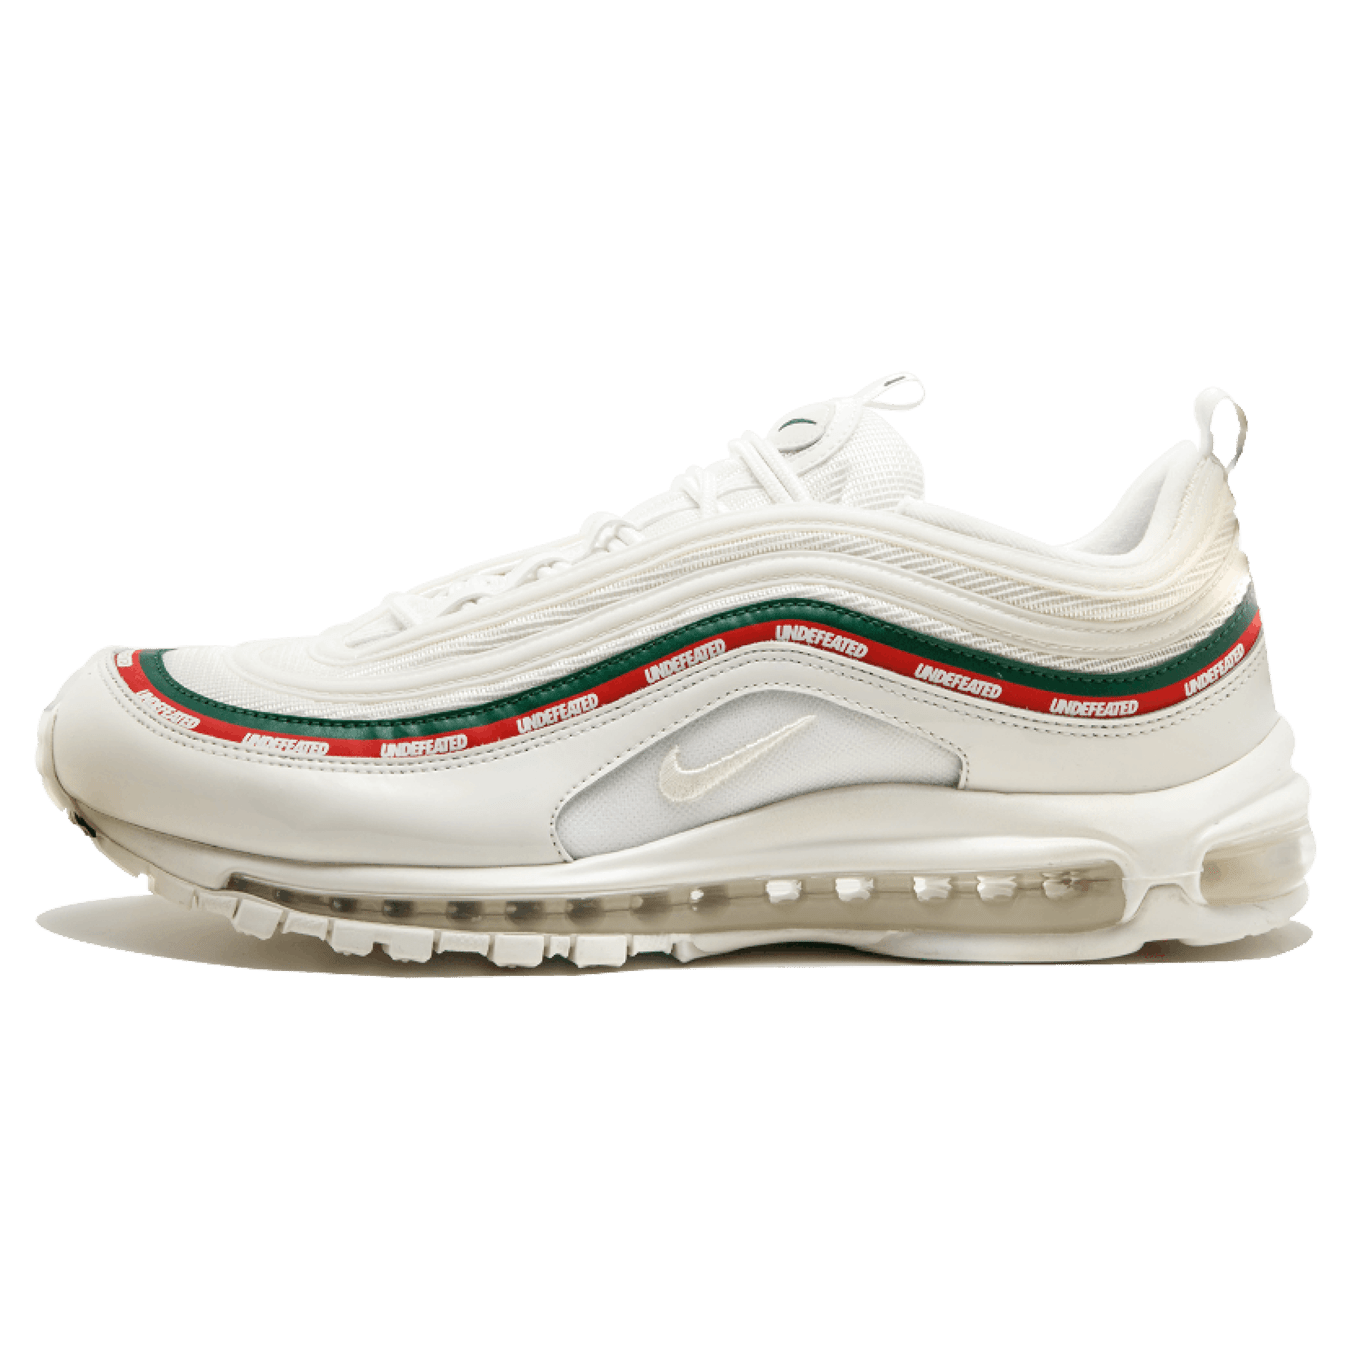 Nike Air Max 97 White Gum for Sale, Authenticity Guaranteed